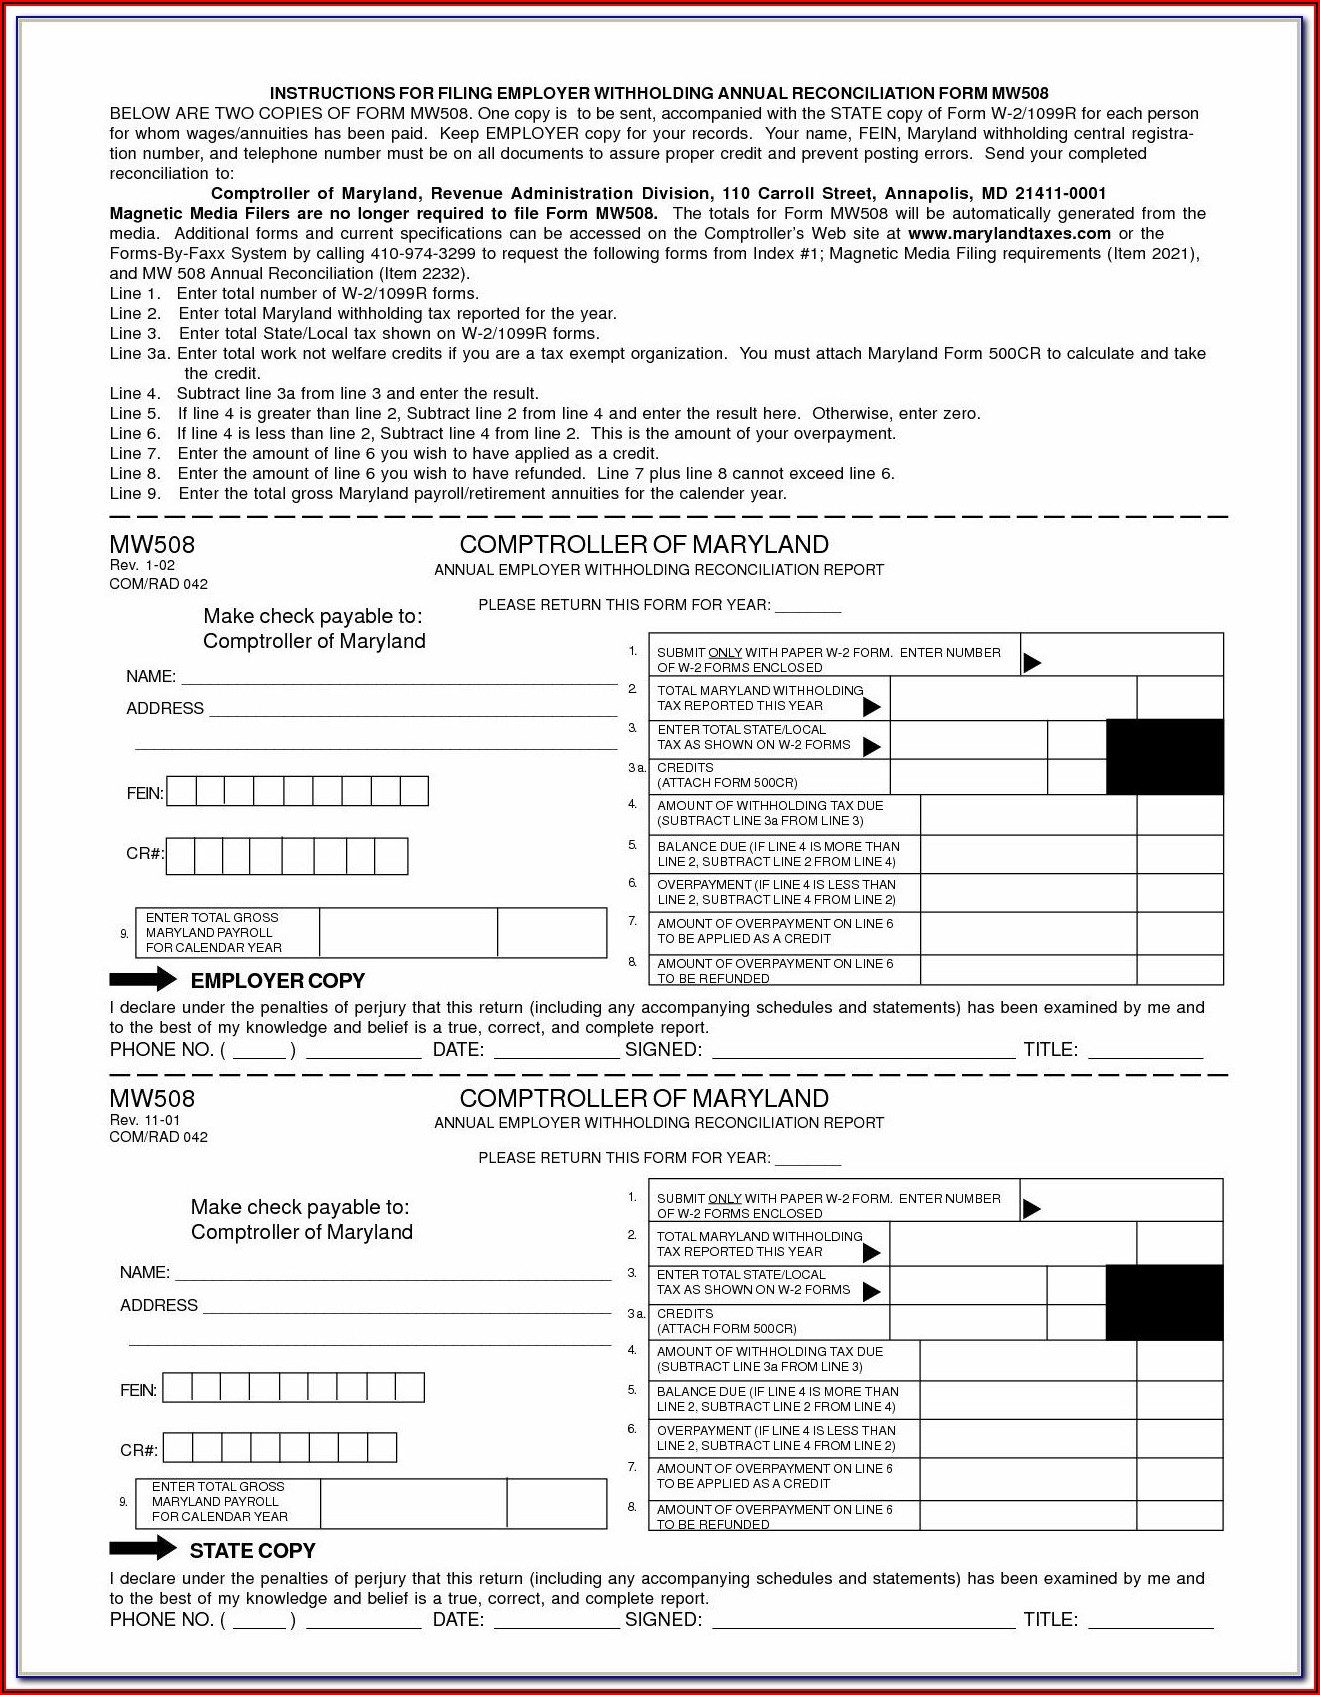 Free Printable Direction To Pay Form